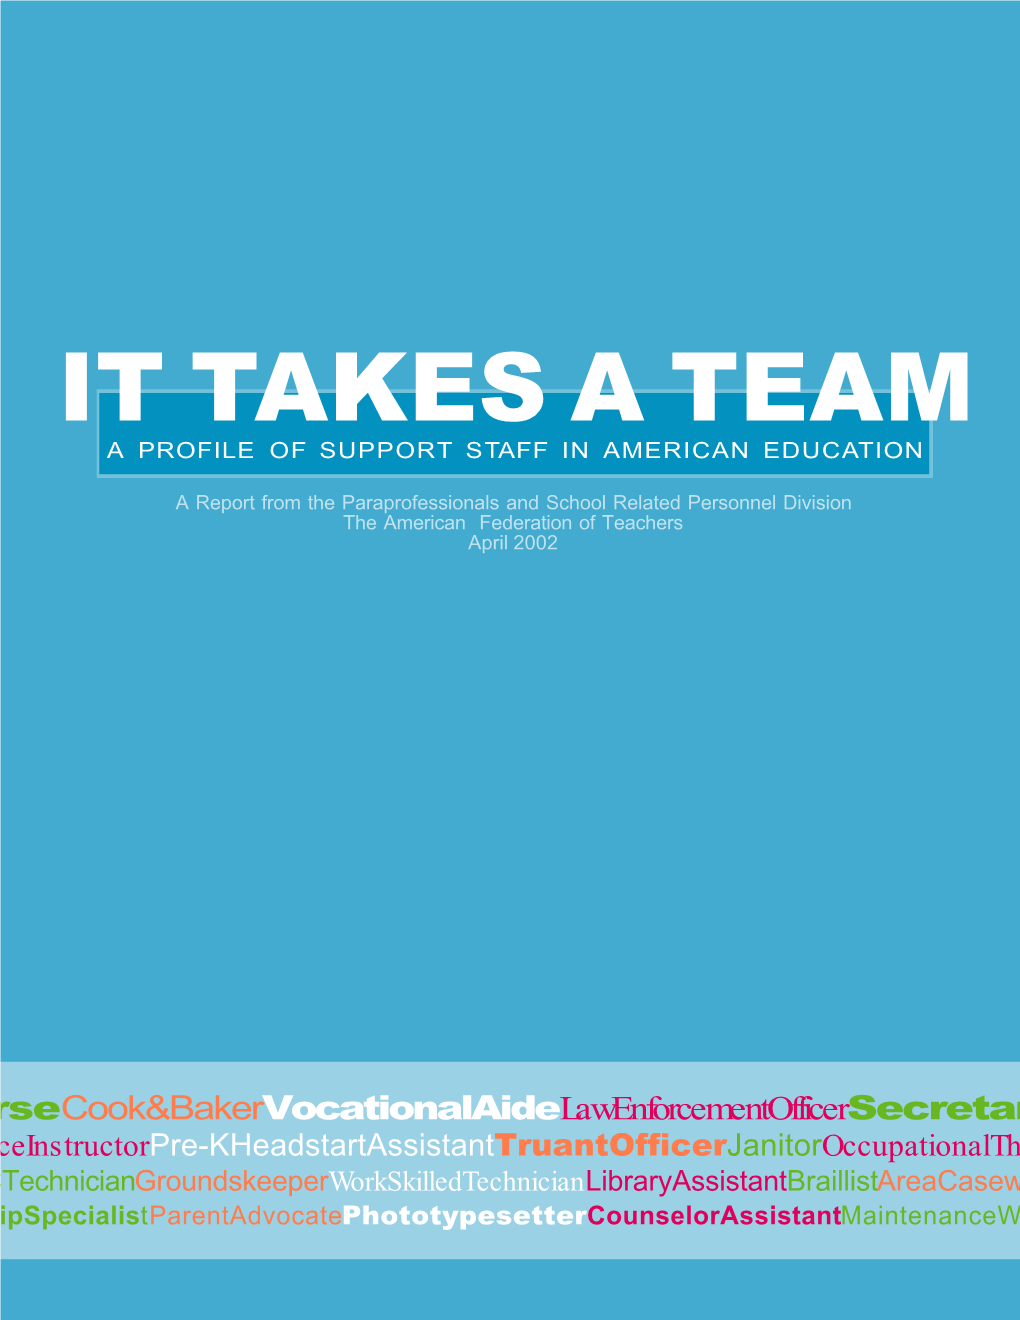 It Takes a Team a Profile of Support Staff in American Education